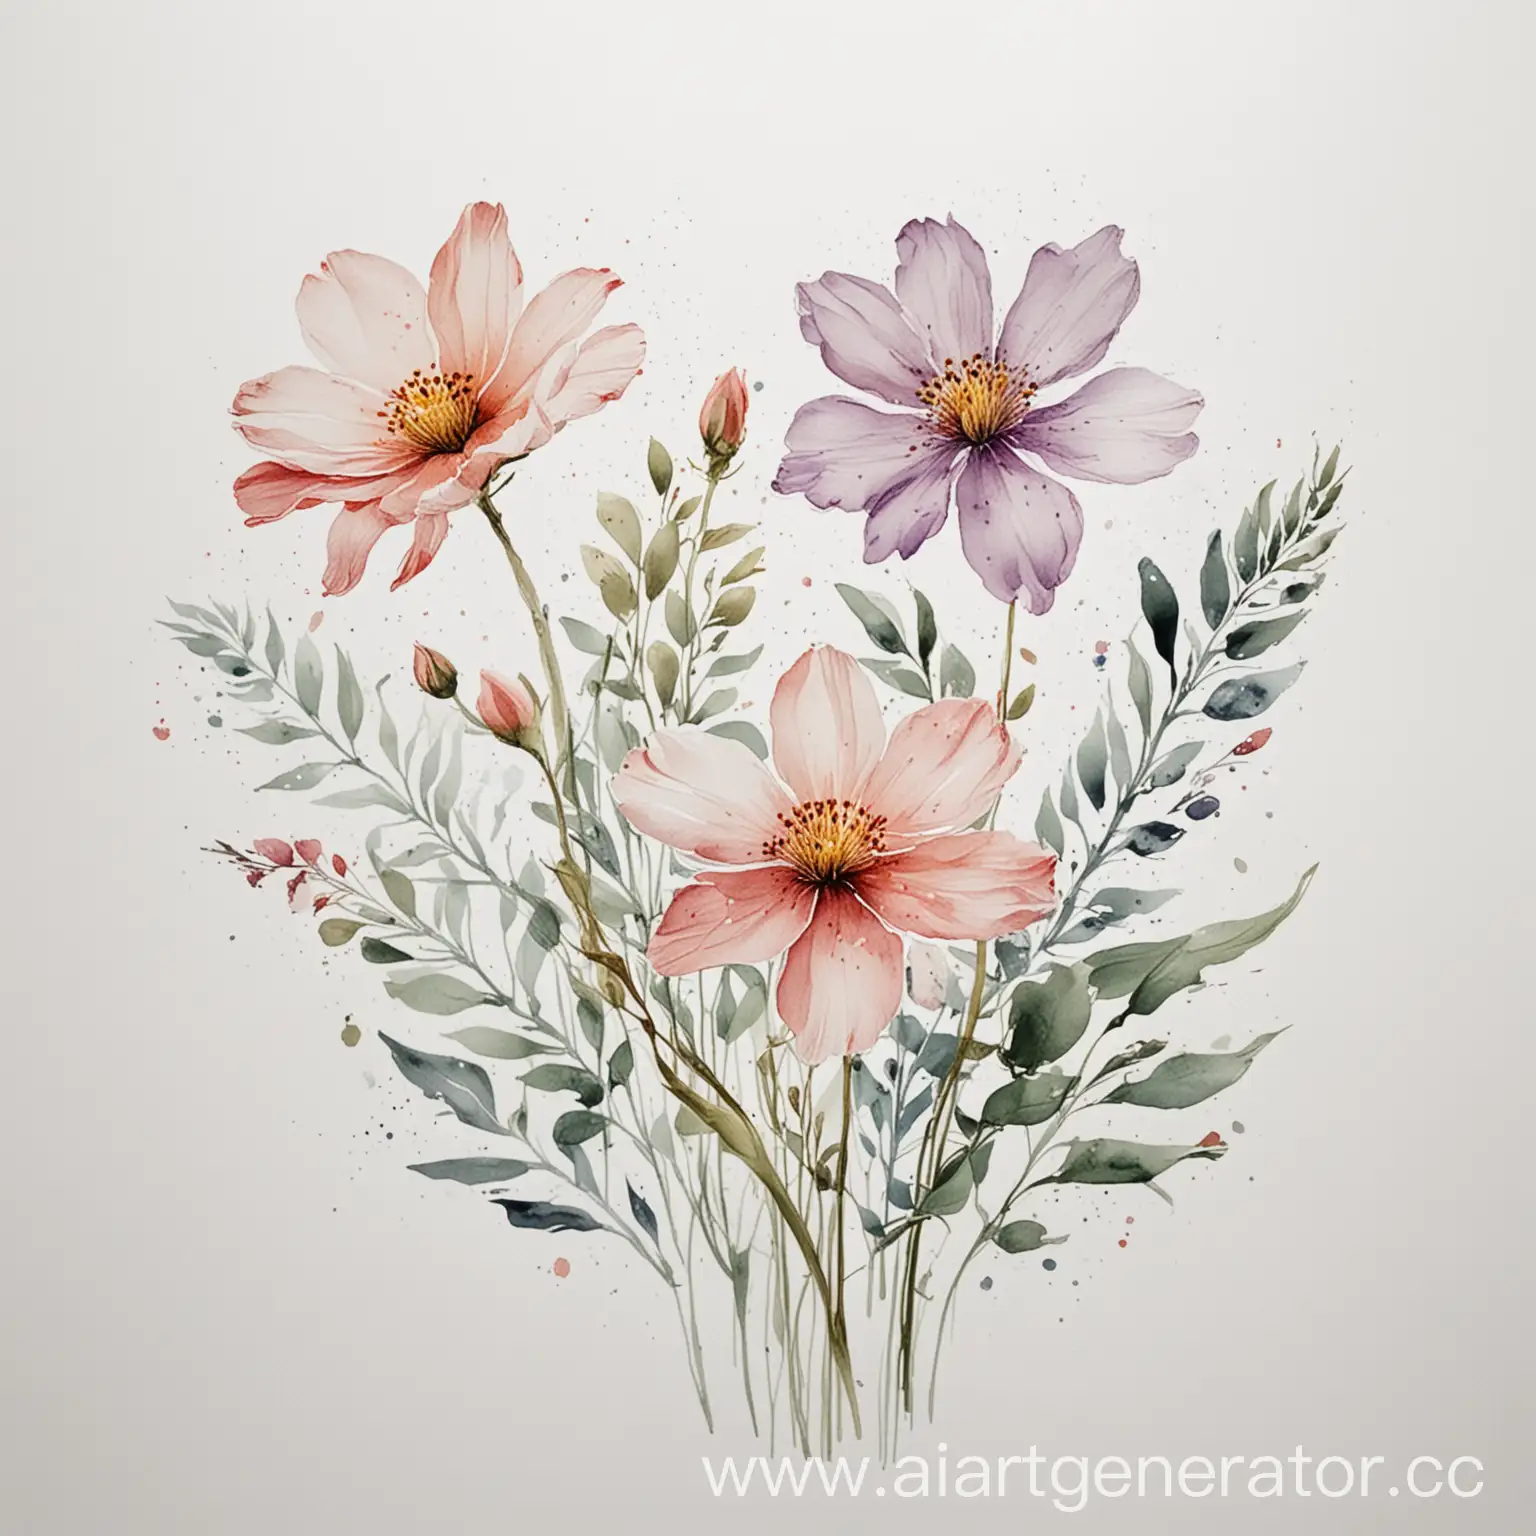 Minimalistic-Watercolor-Drawing-of-Delicate-Flowers-on-White-Background